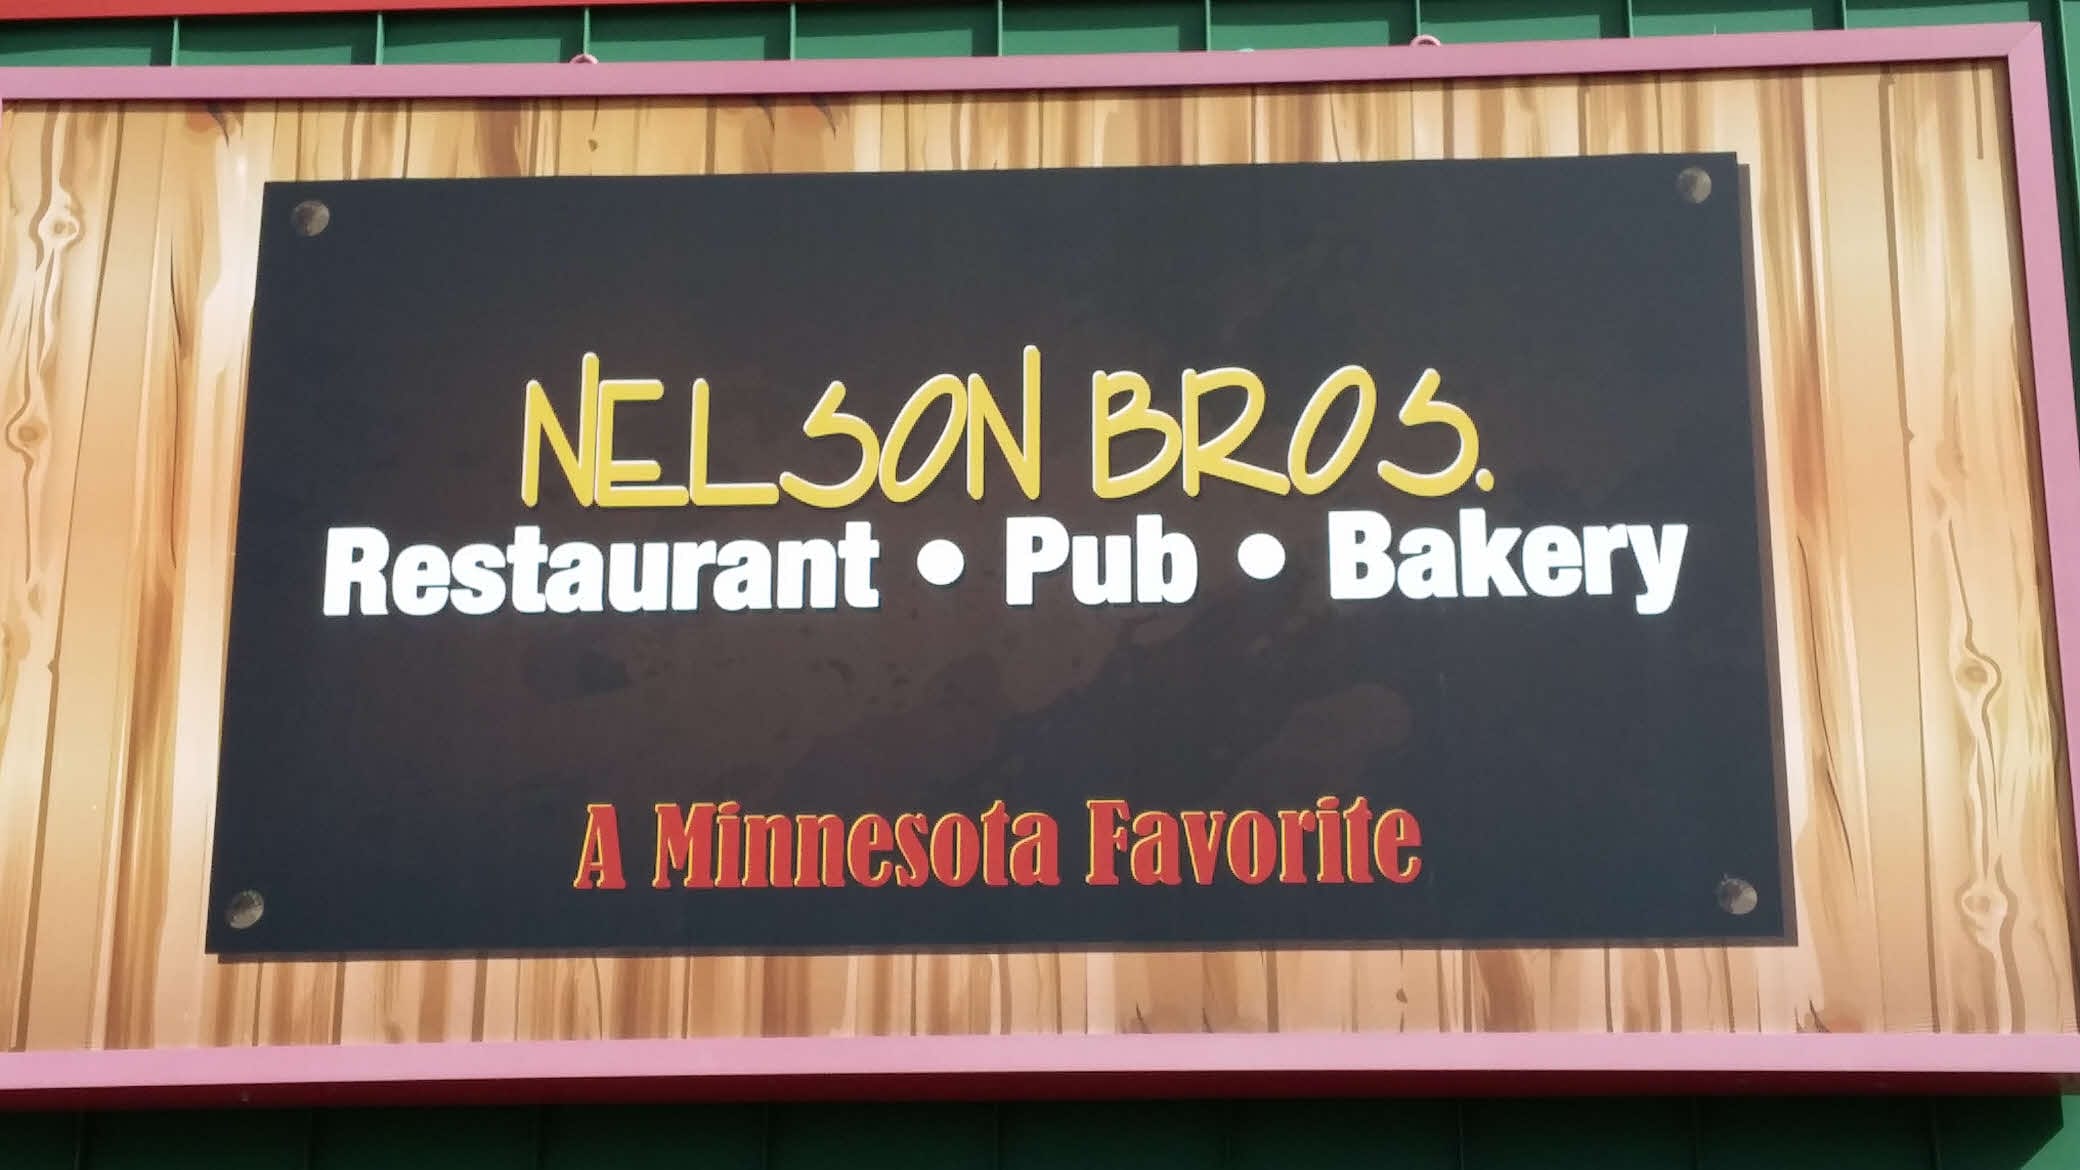 Sign for Nelson Bros Restaurant and Bakery in Clearwater MN